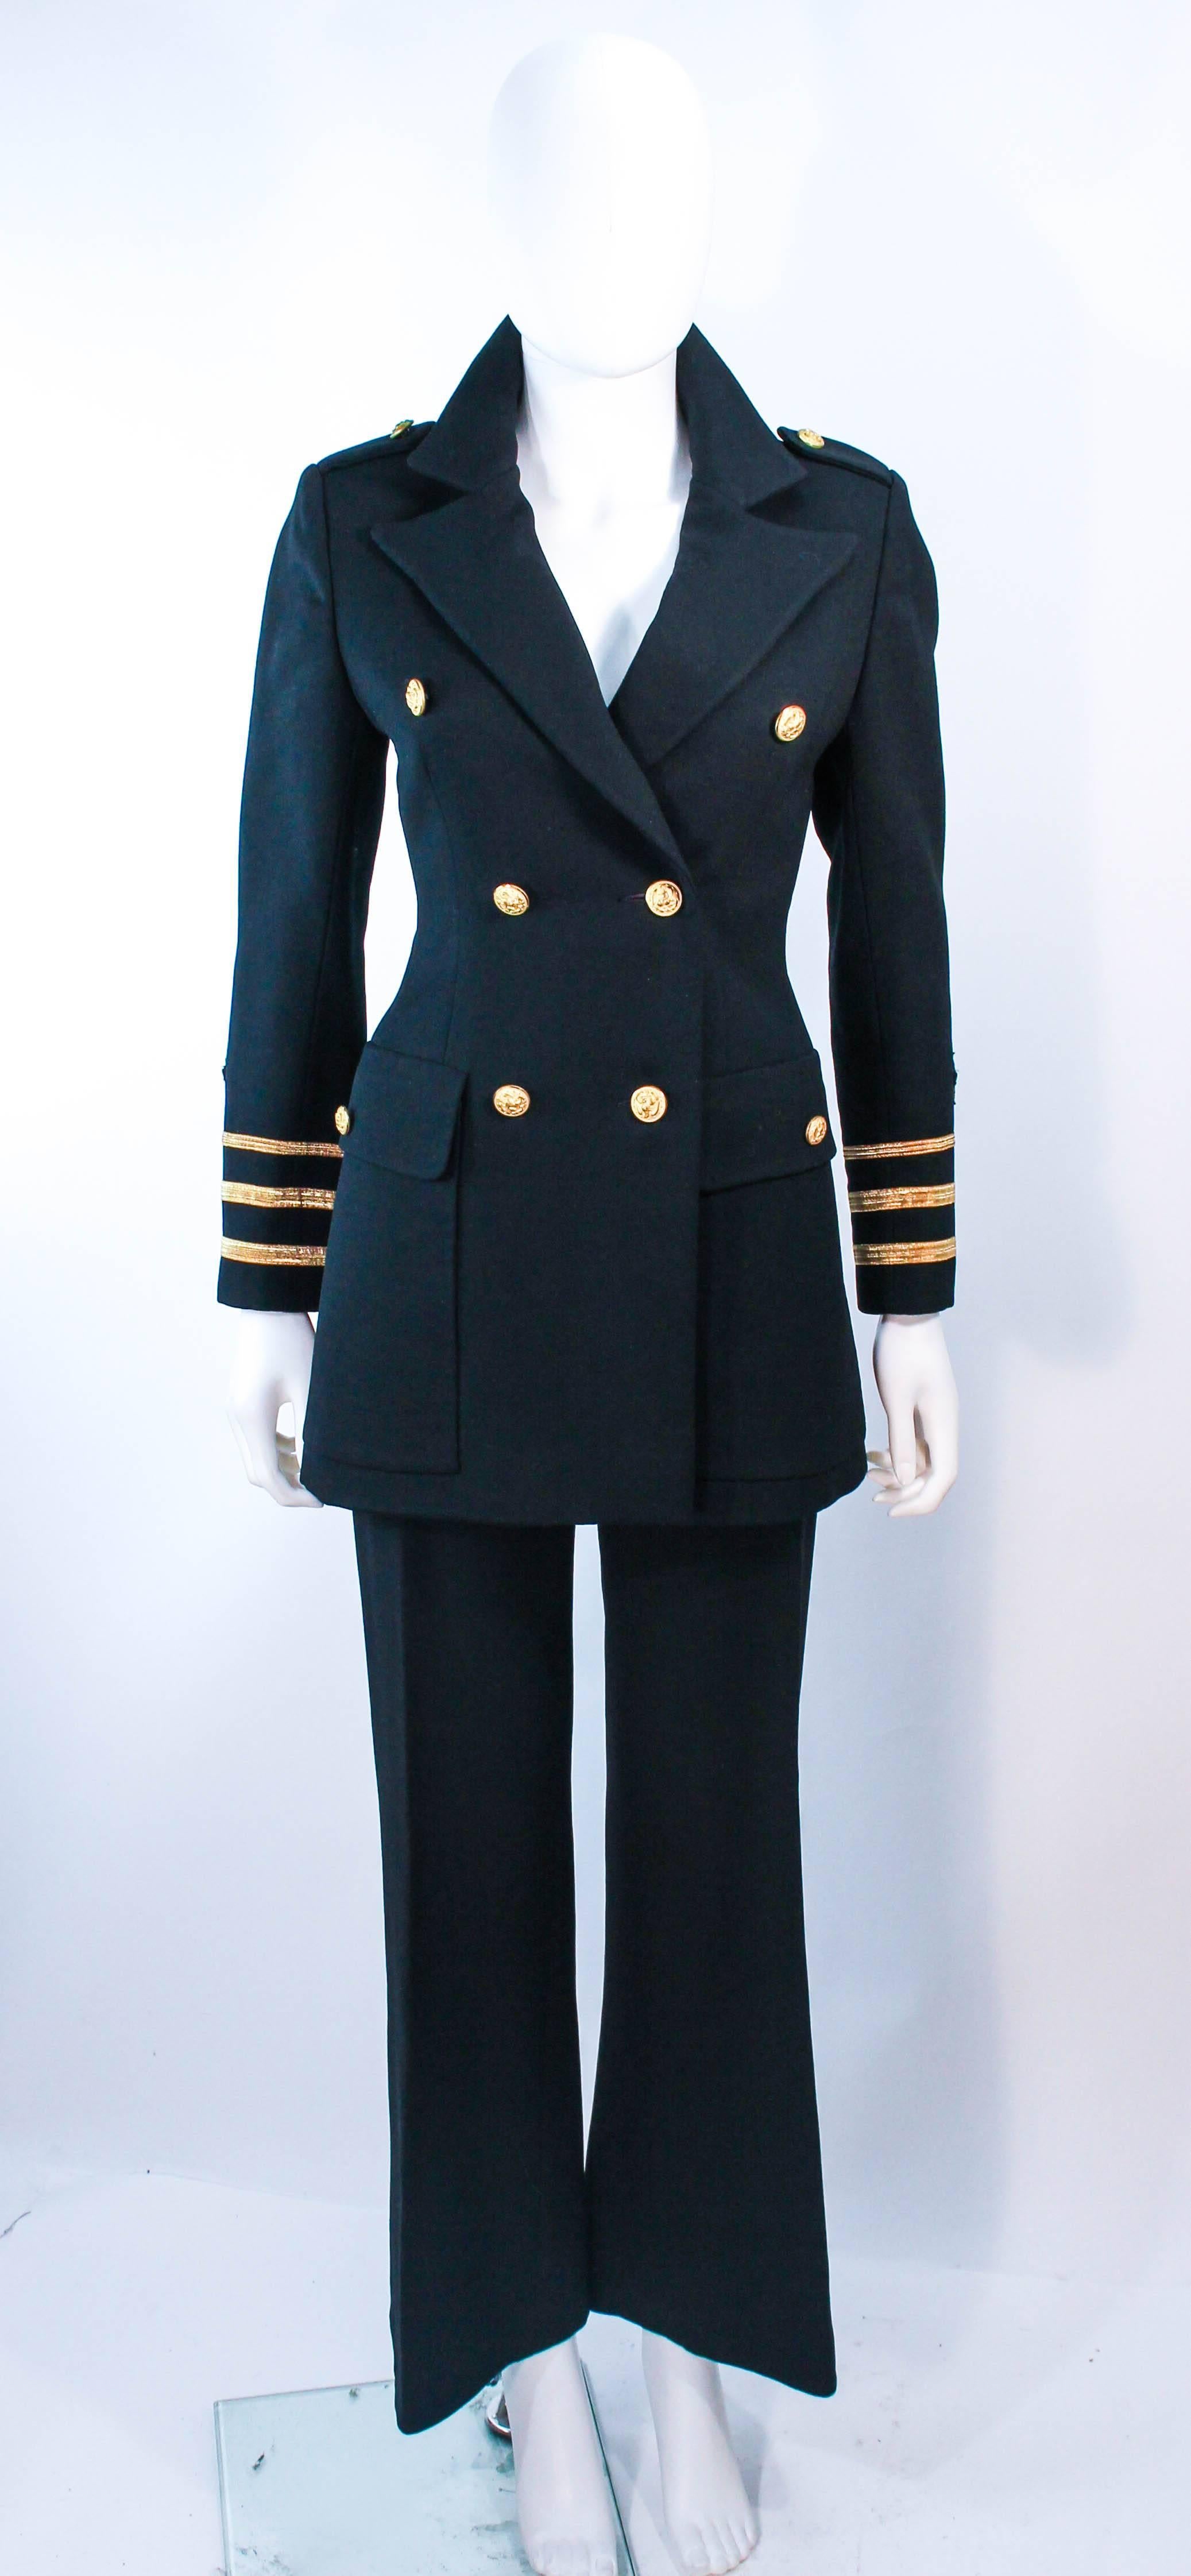 This Gunter Project pant suit is composed of black wool and features gold patch appliques. The jacket has center front button closures and the wide fit slacks have front gold button closures as well. In excellent vintage condition.

**Please